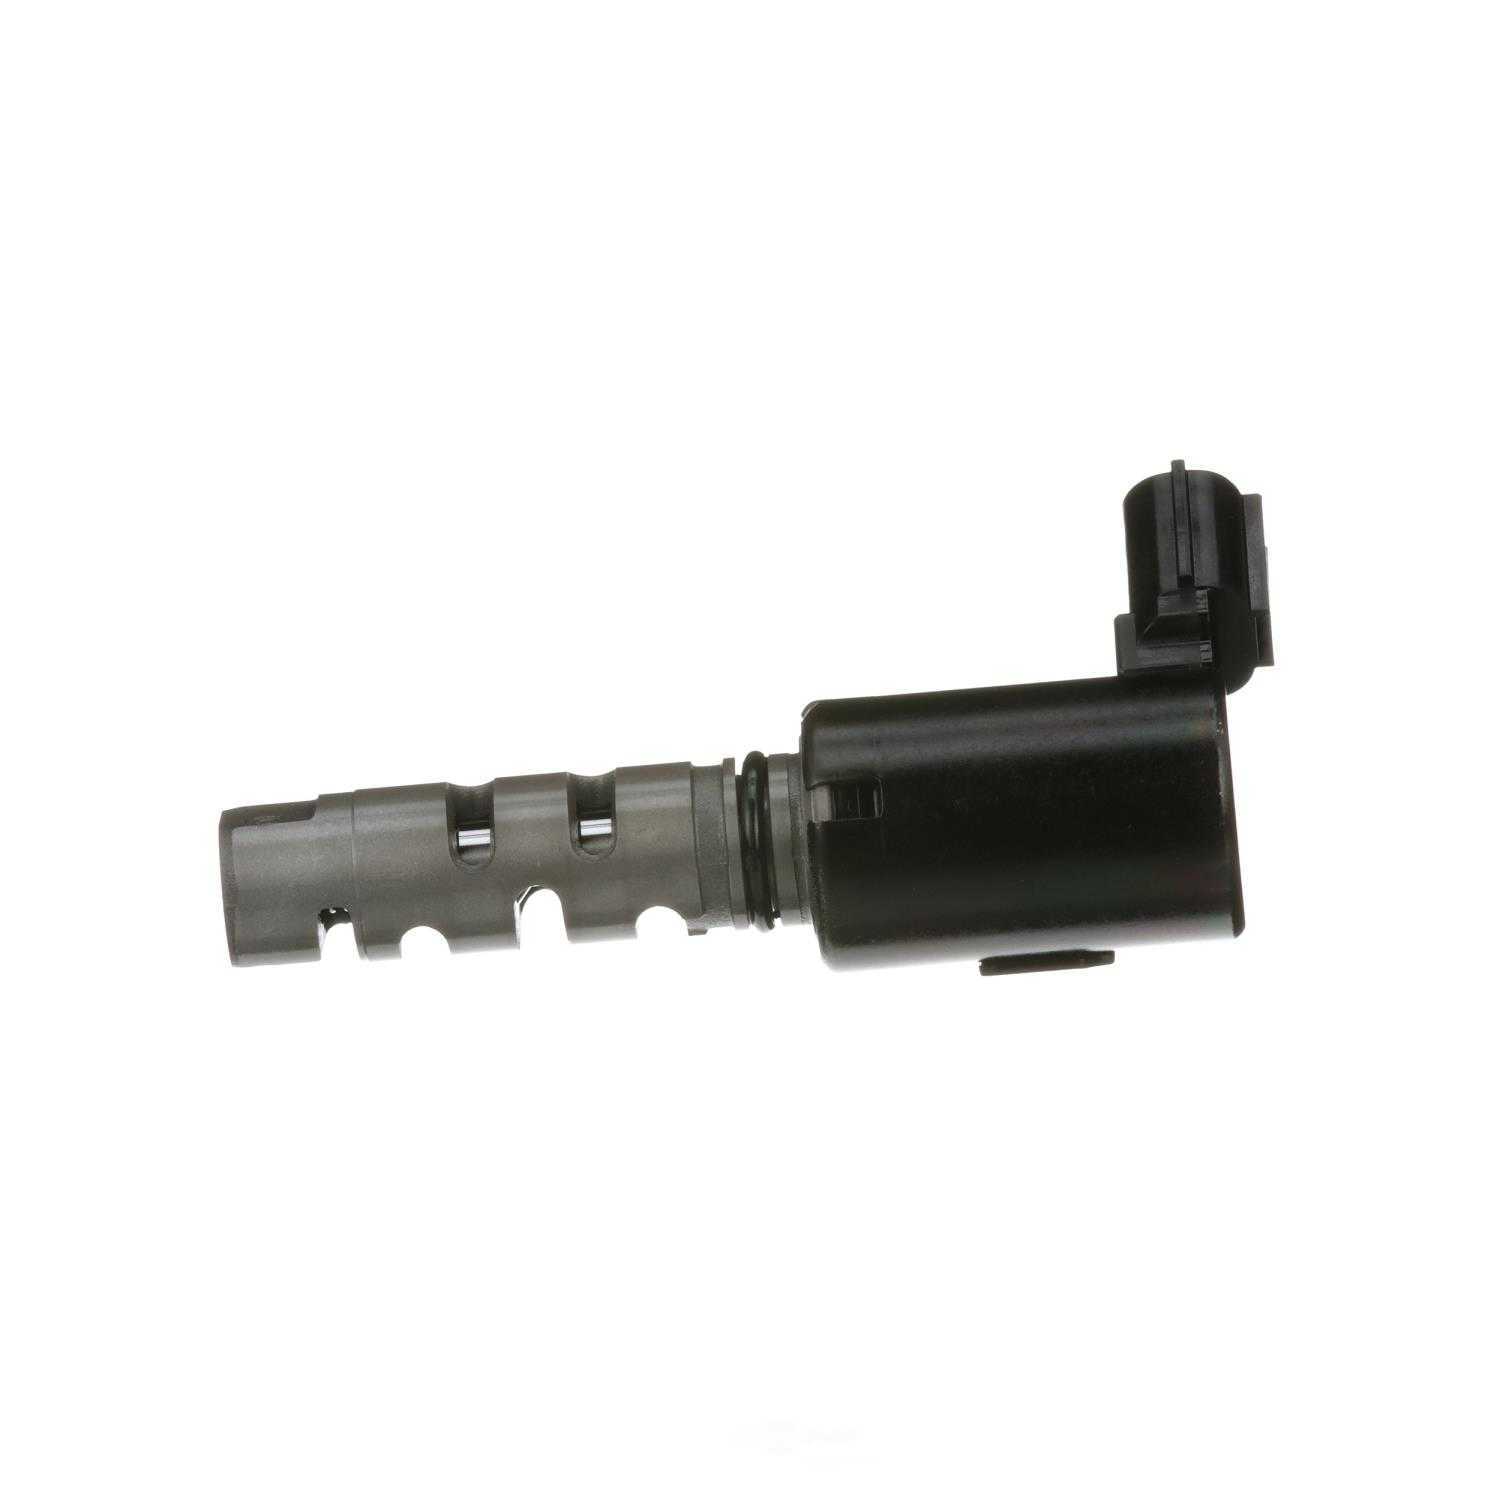 STANDARD MOTOR PRODUCTS - Engine Variable Valve Lift Eccentric Shaft Actuator - STA VVT113